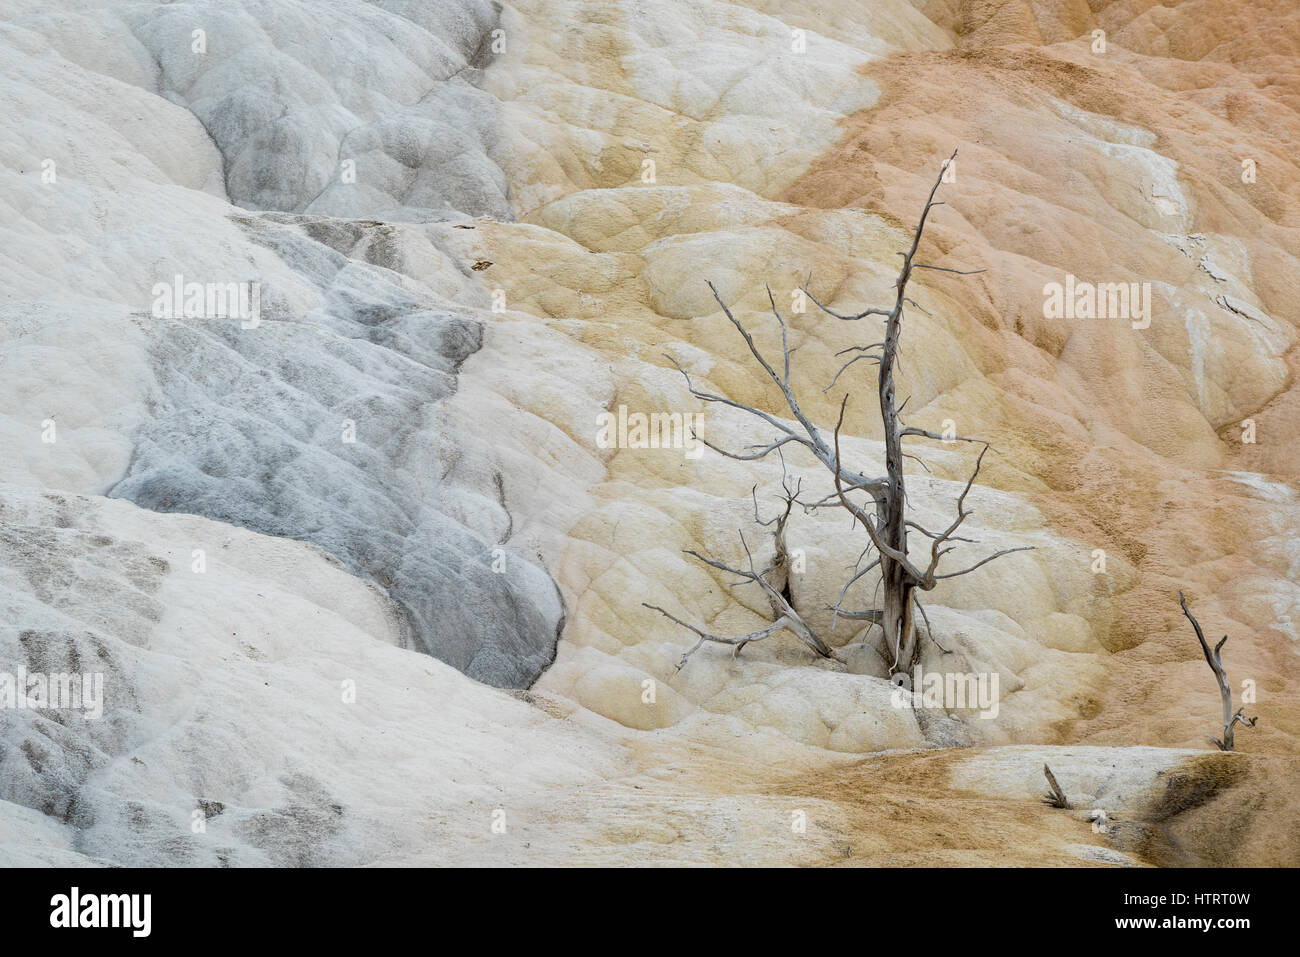 Mammoth Hot Springs Lower Terraces, Yellowstone National Park, Wyoming. Stock Photo